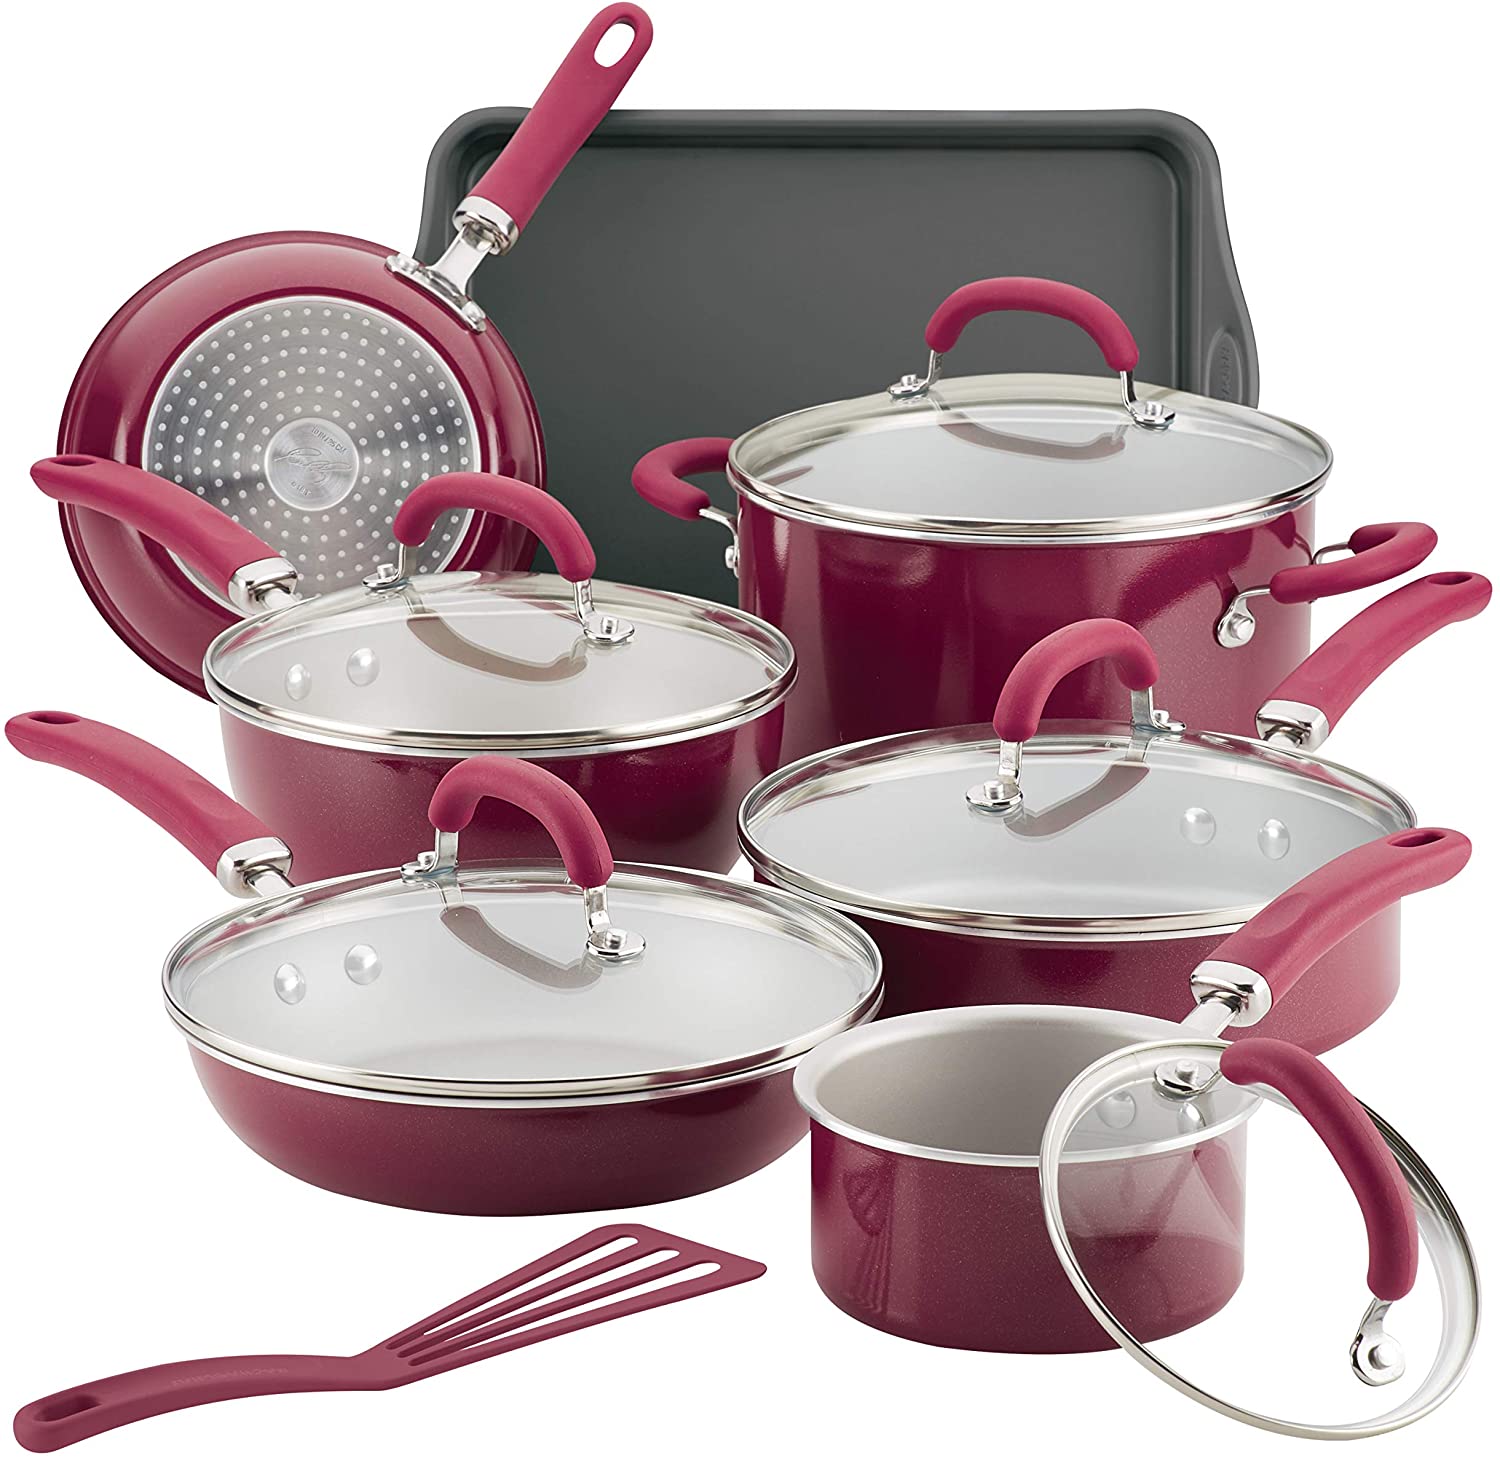 Rachael Ray Brights Nonstick Cookware Set / Pots and Pans Set - 14 Piece,  Red Gradient